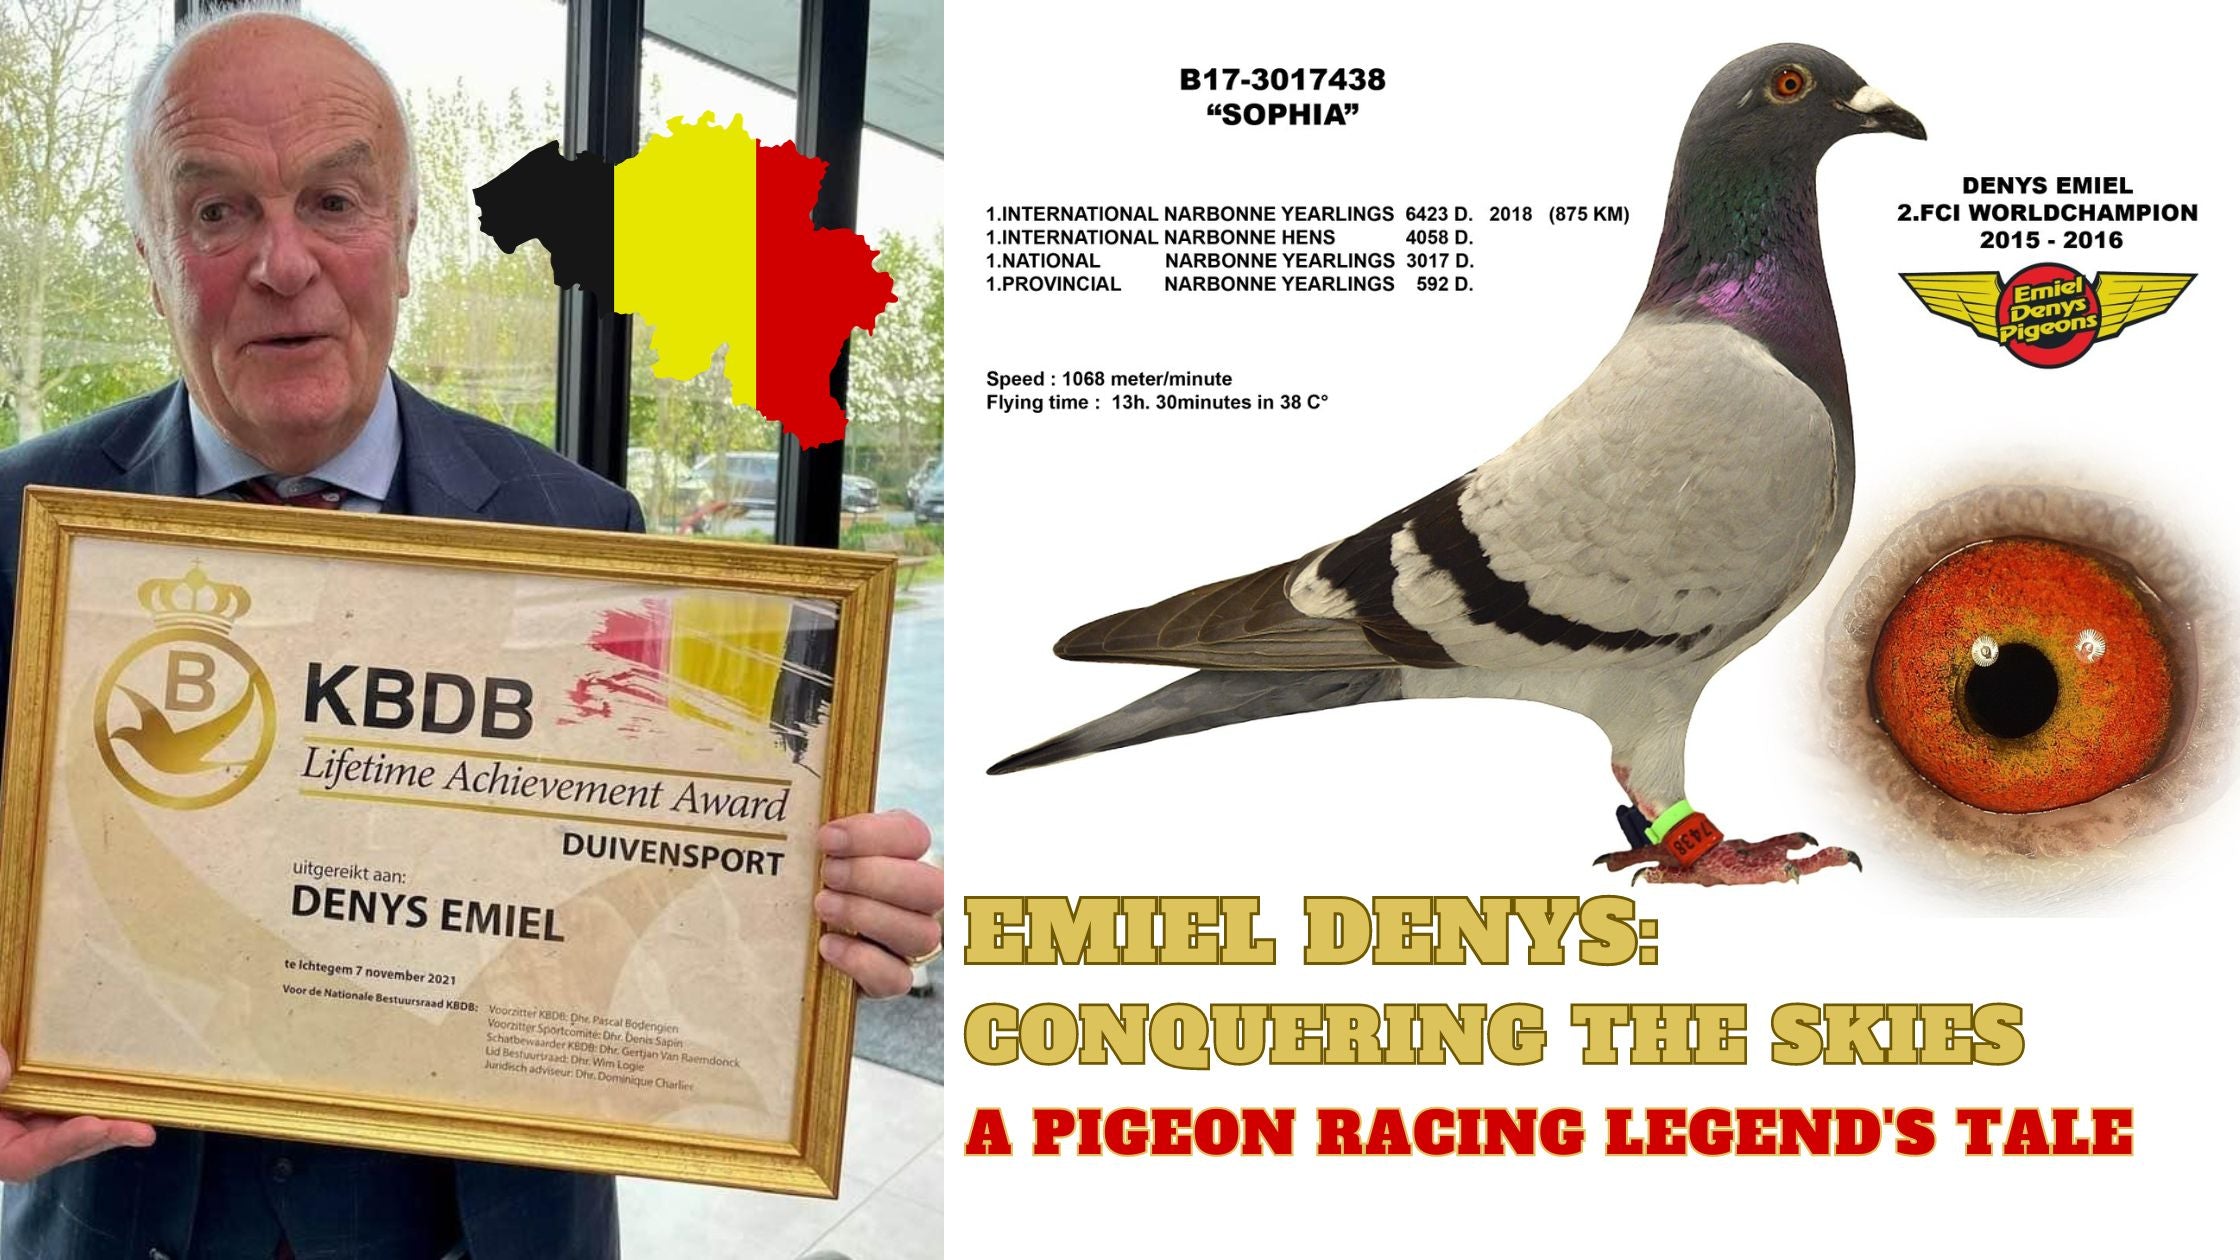 Emiel Denys: Conquering the Skies - A Pigeon Racing Legend's Tale